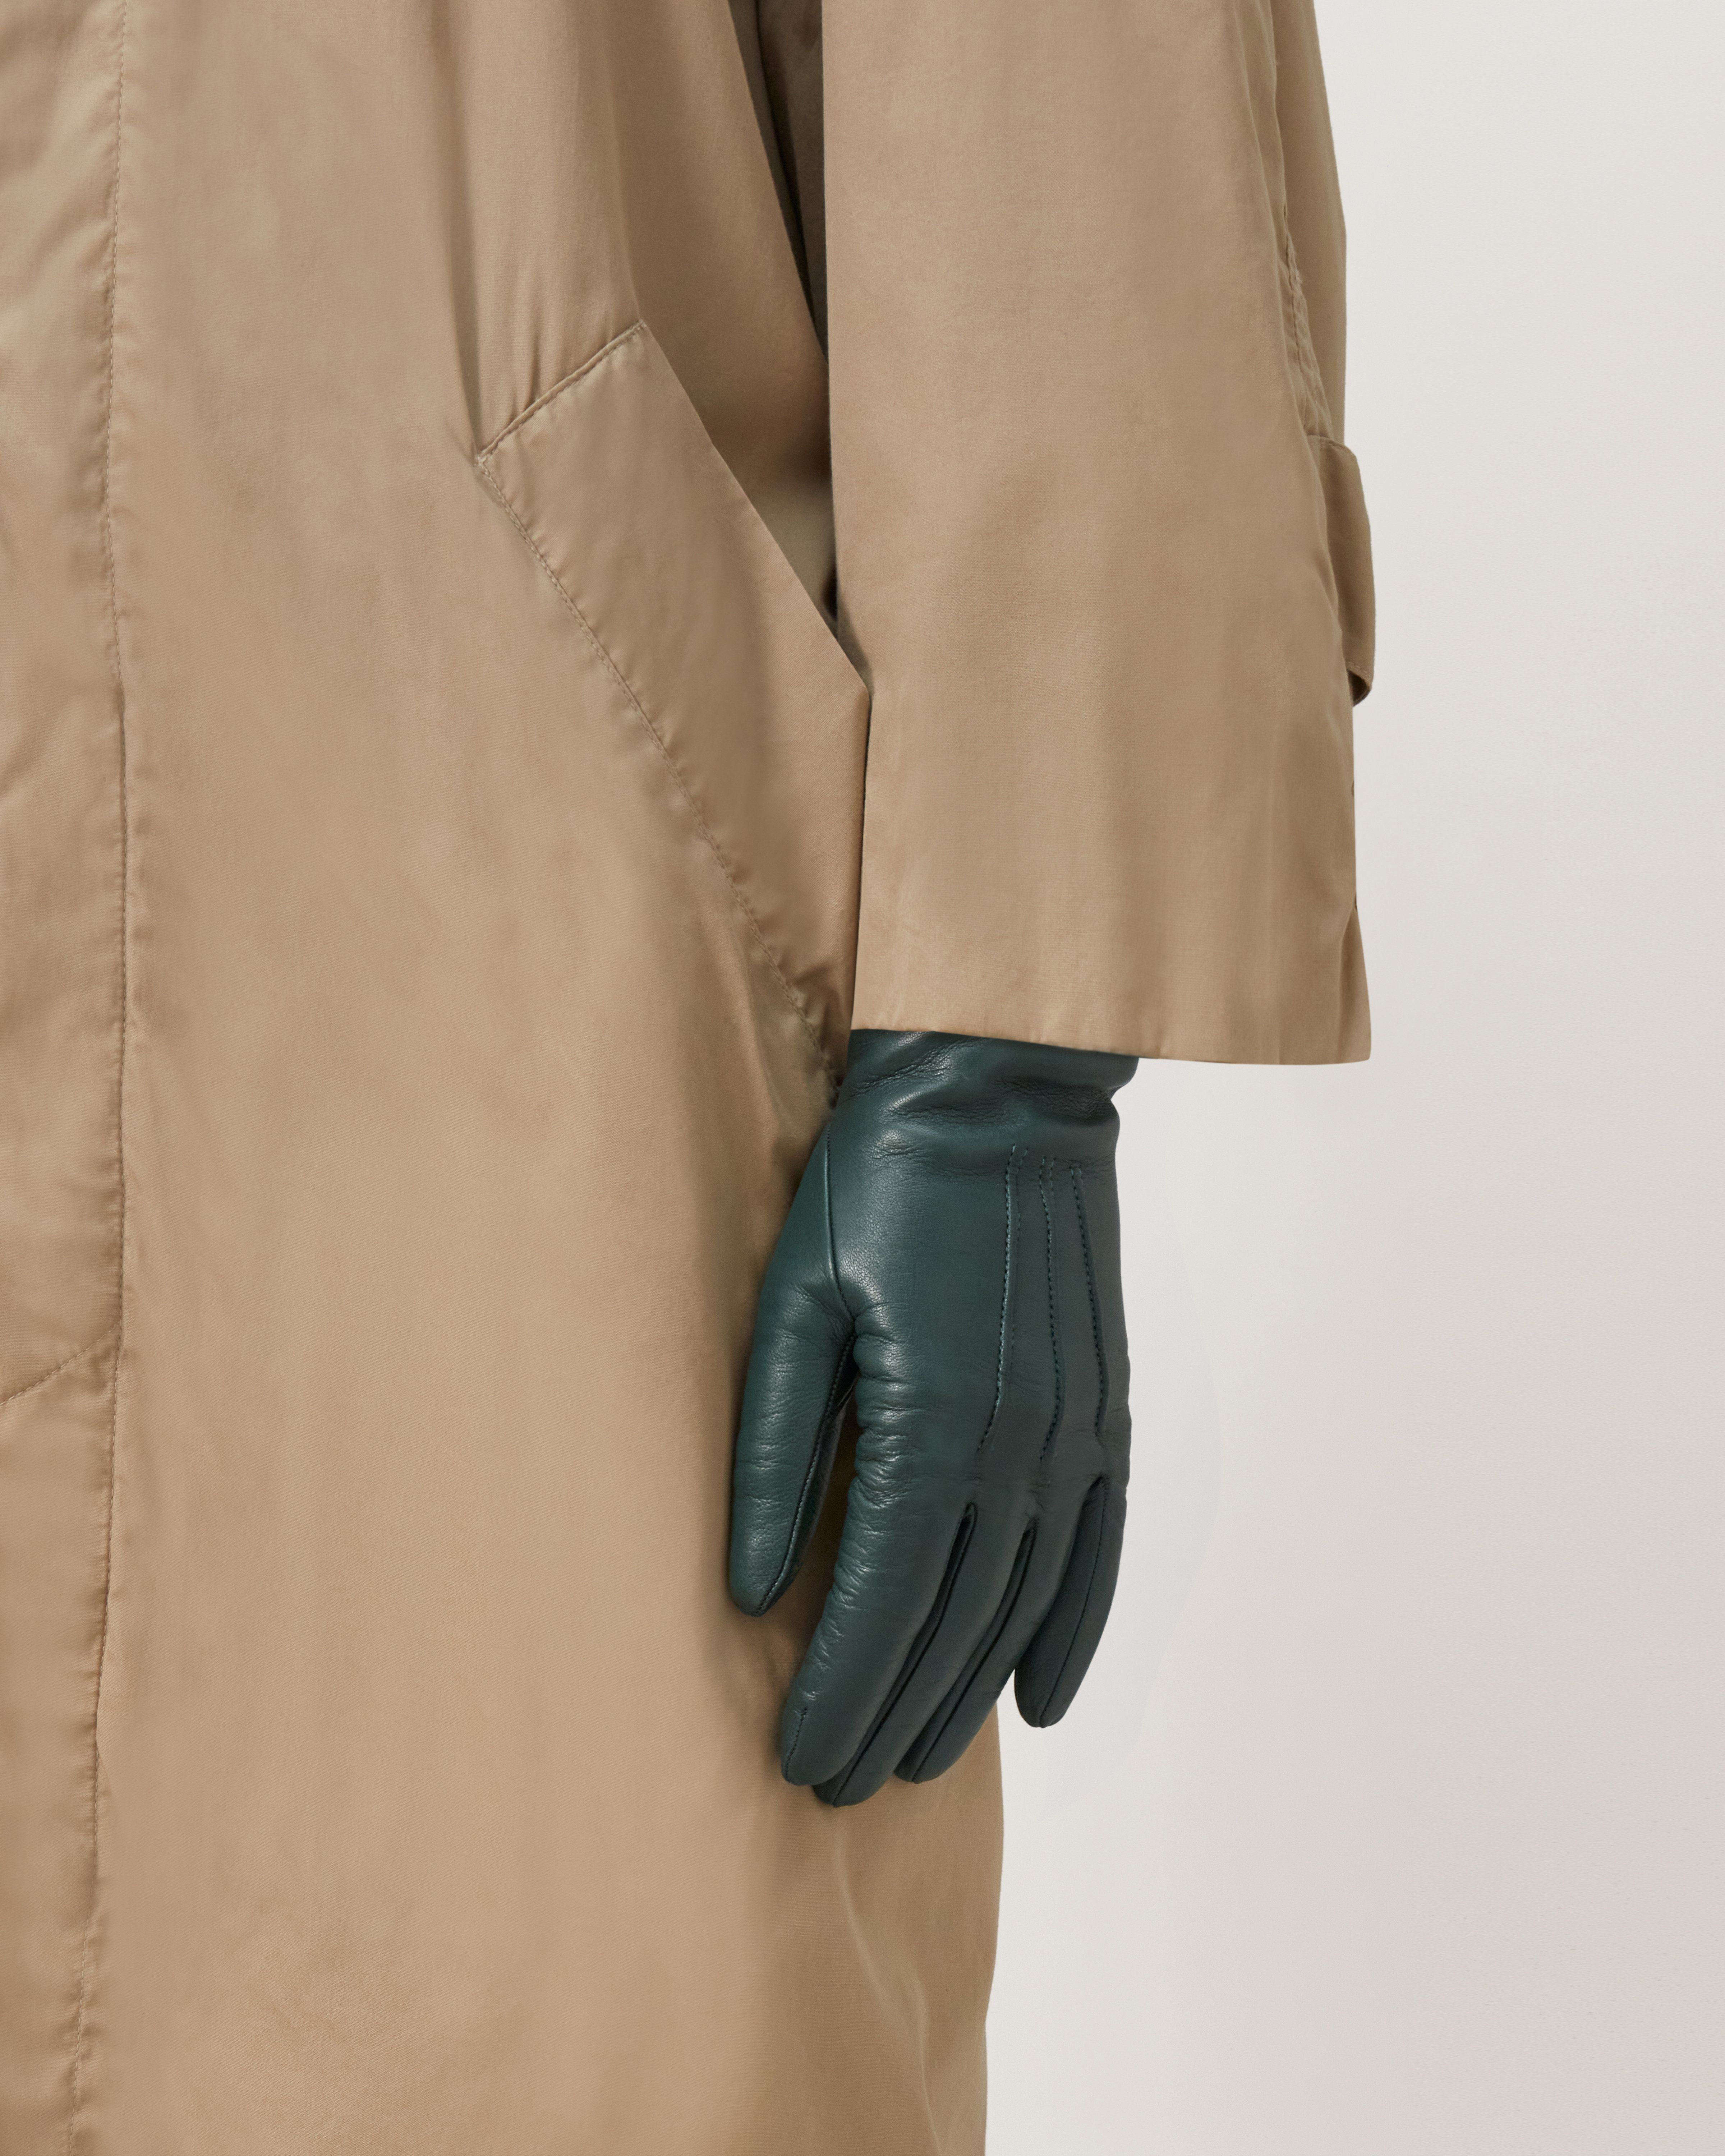 Soft Nappa Gloves, Mulberry Green Nappa Leather, Women